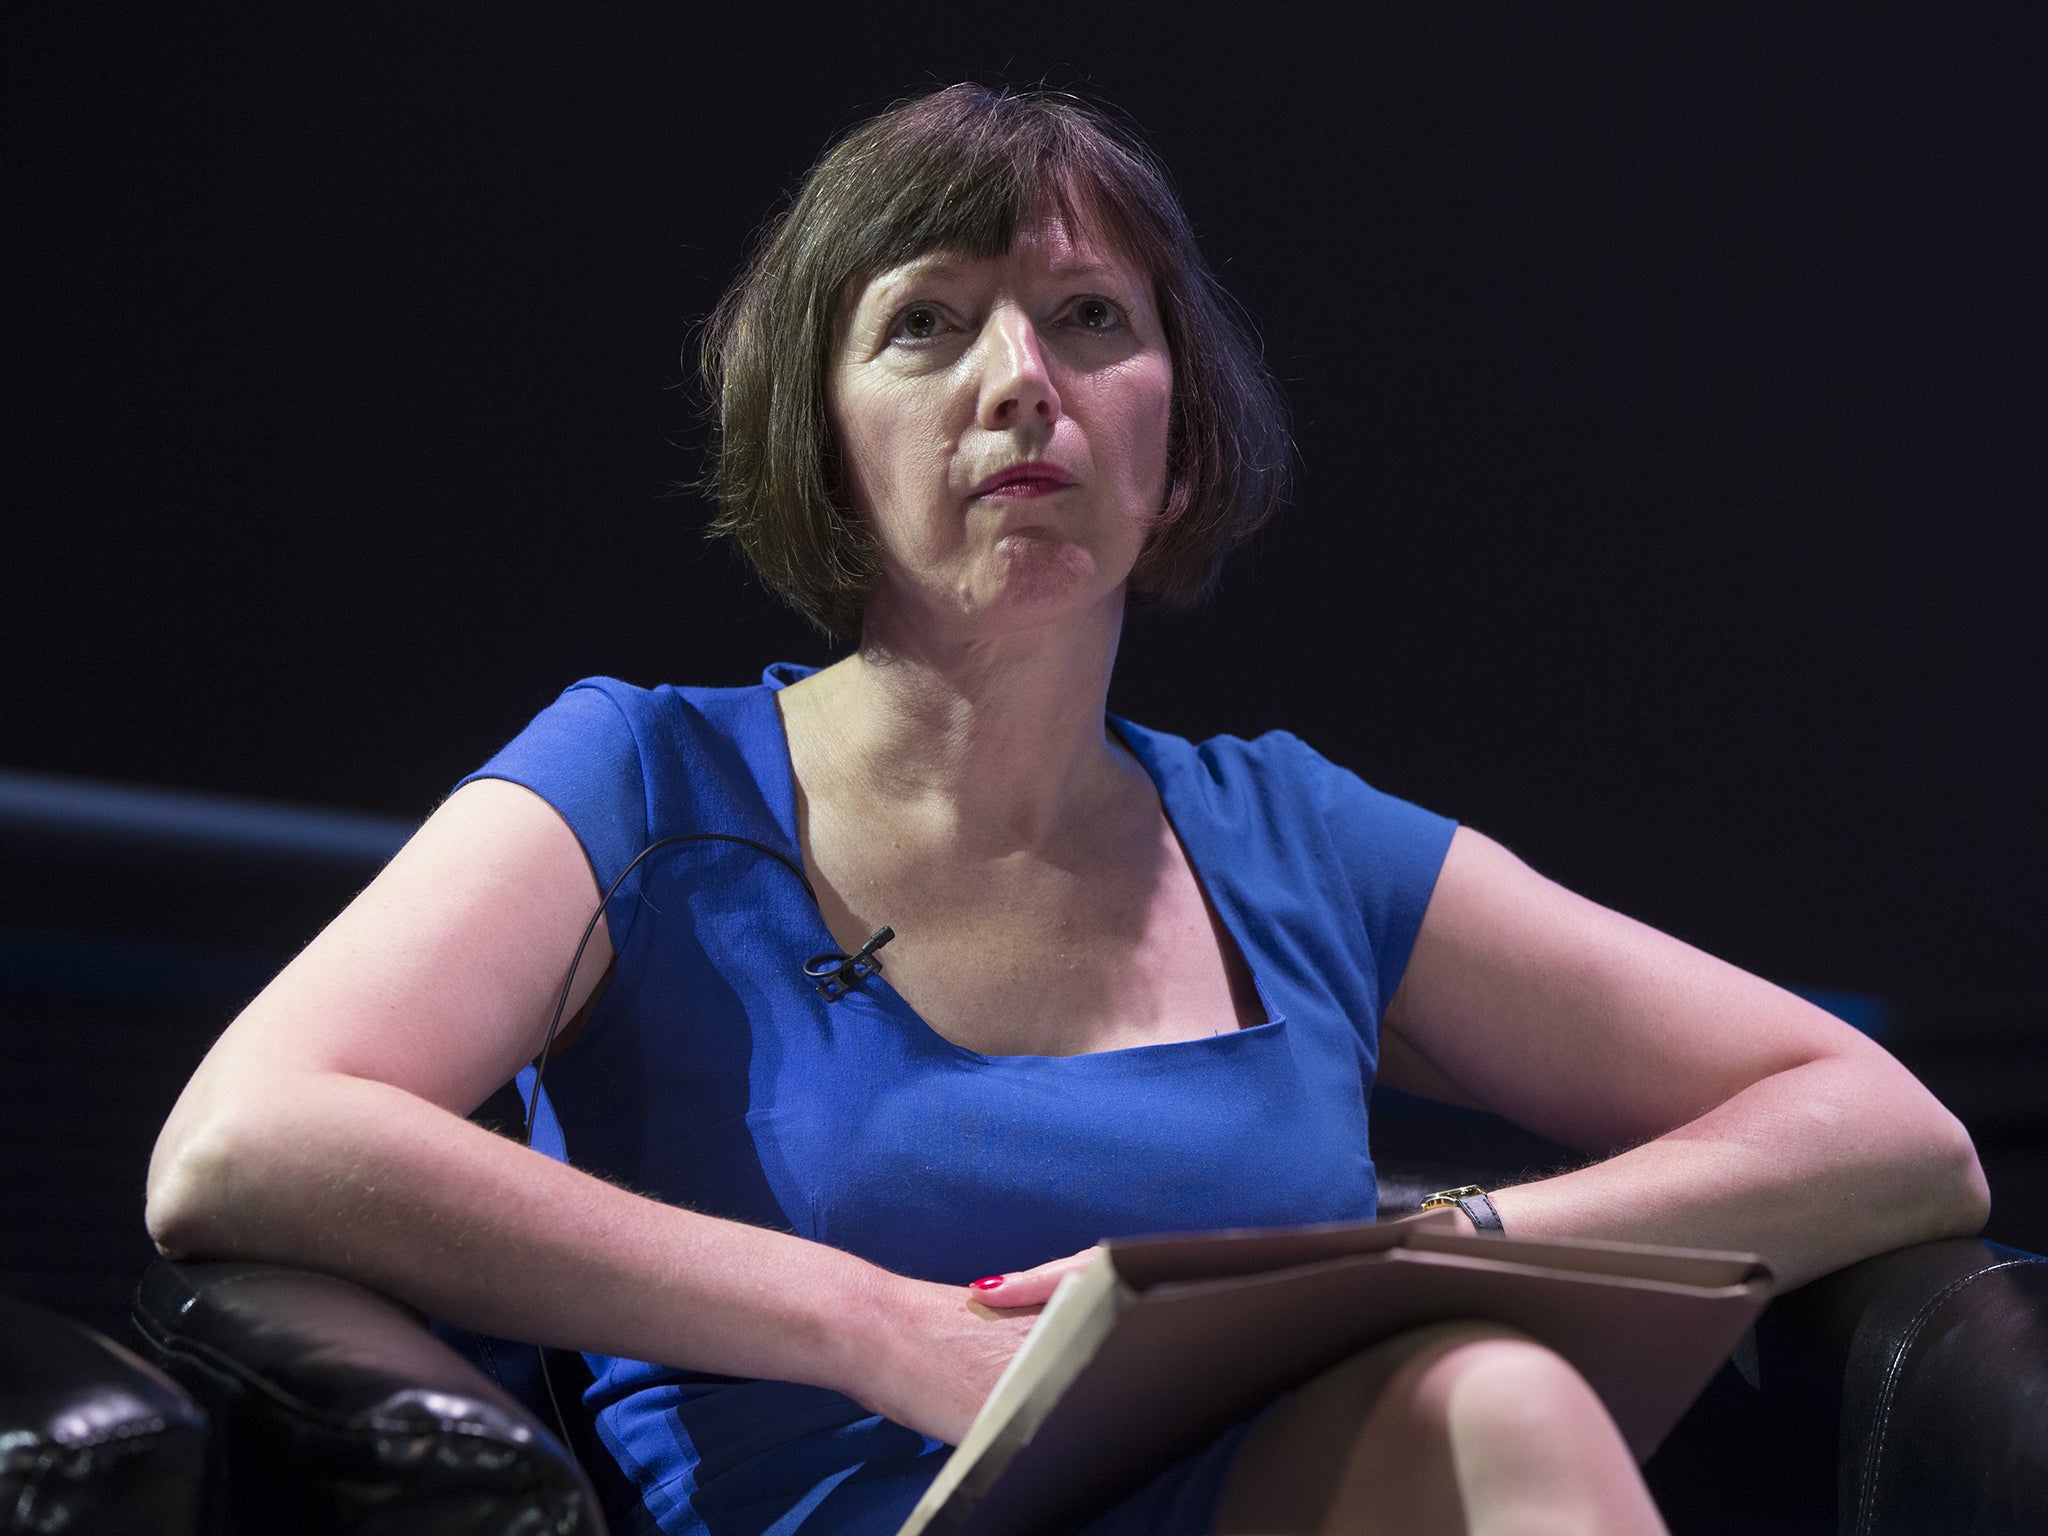 Frances O'Grady, General Secretary of the TUC, is lobbying for the Governor of the Bank of England to be forced to consider how many people are in work